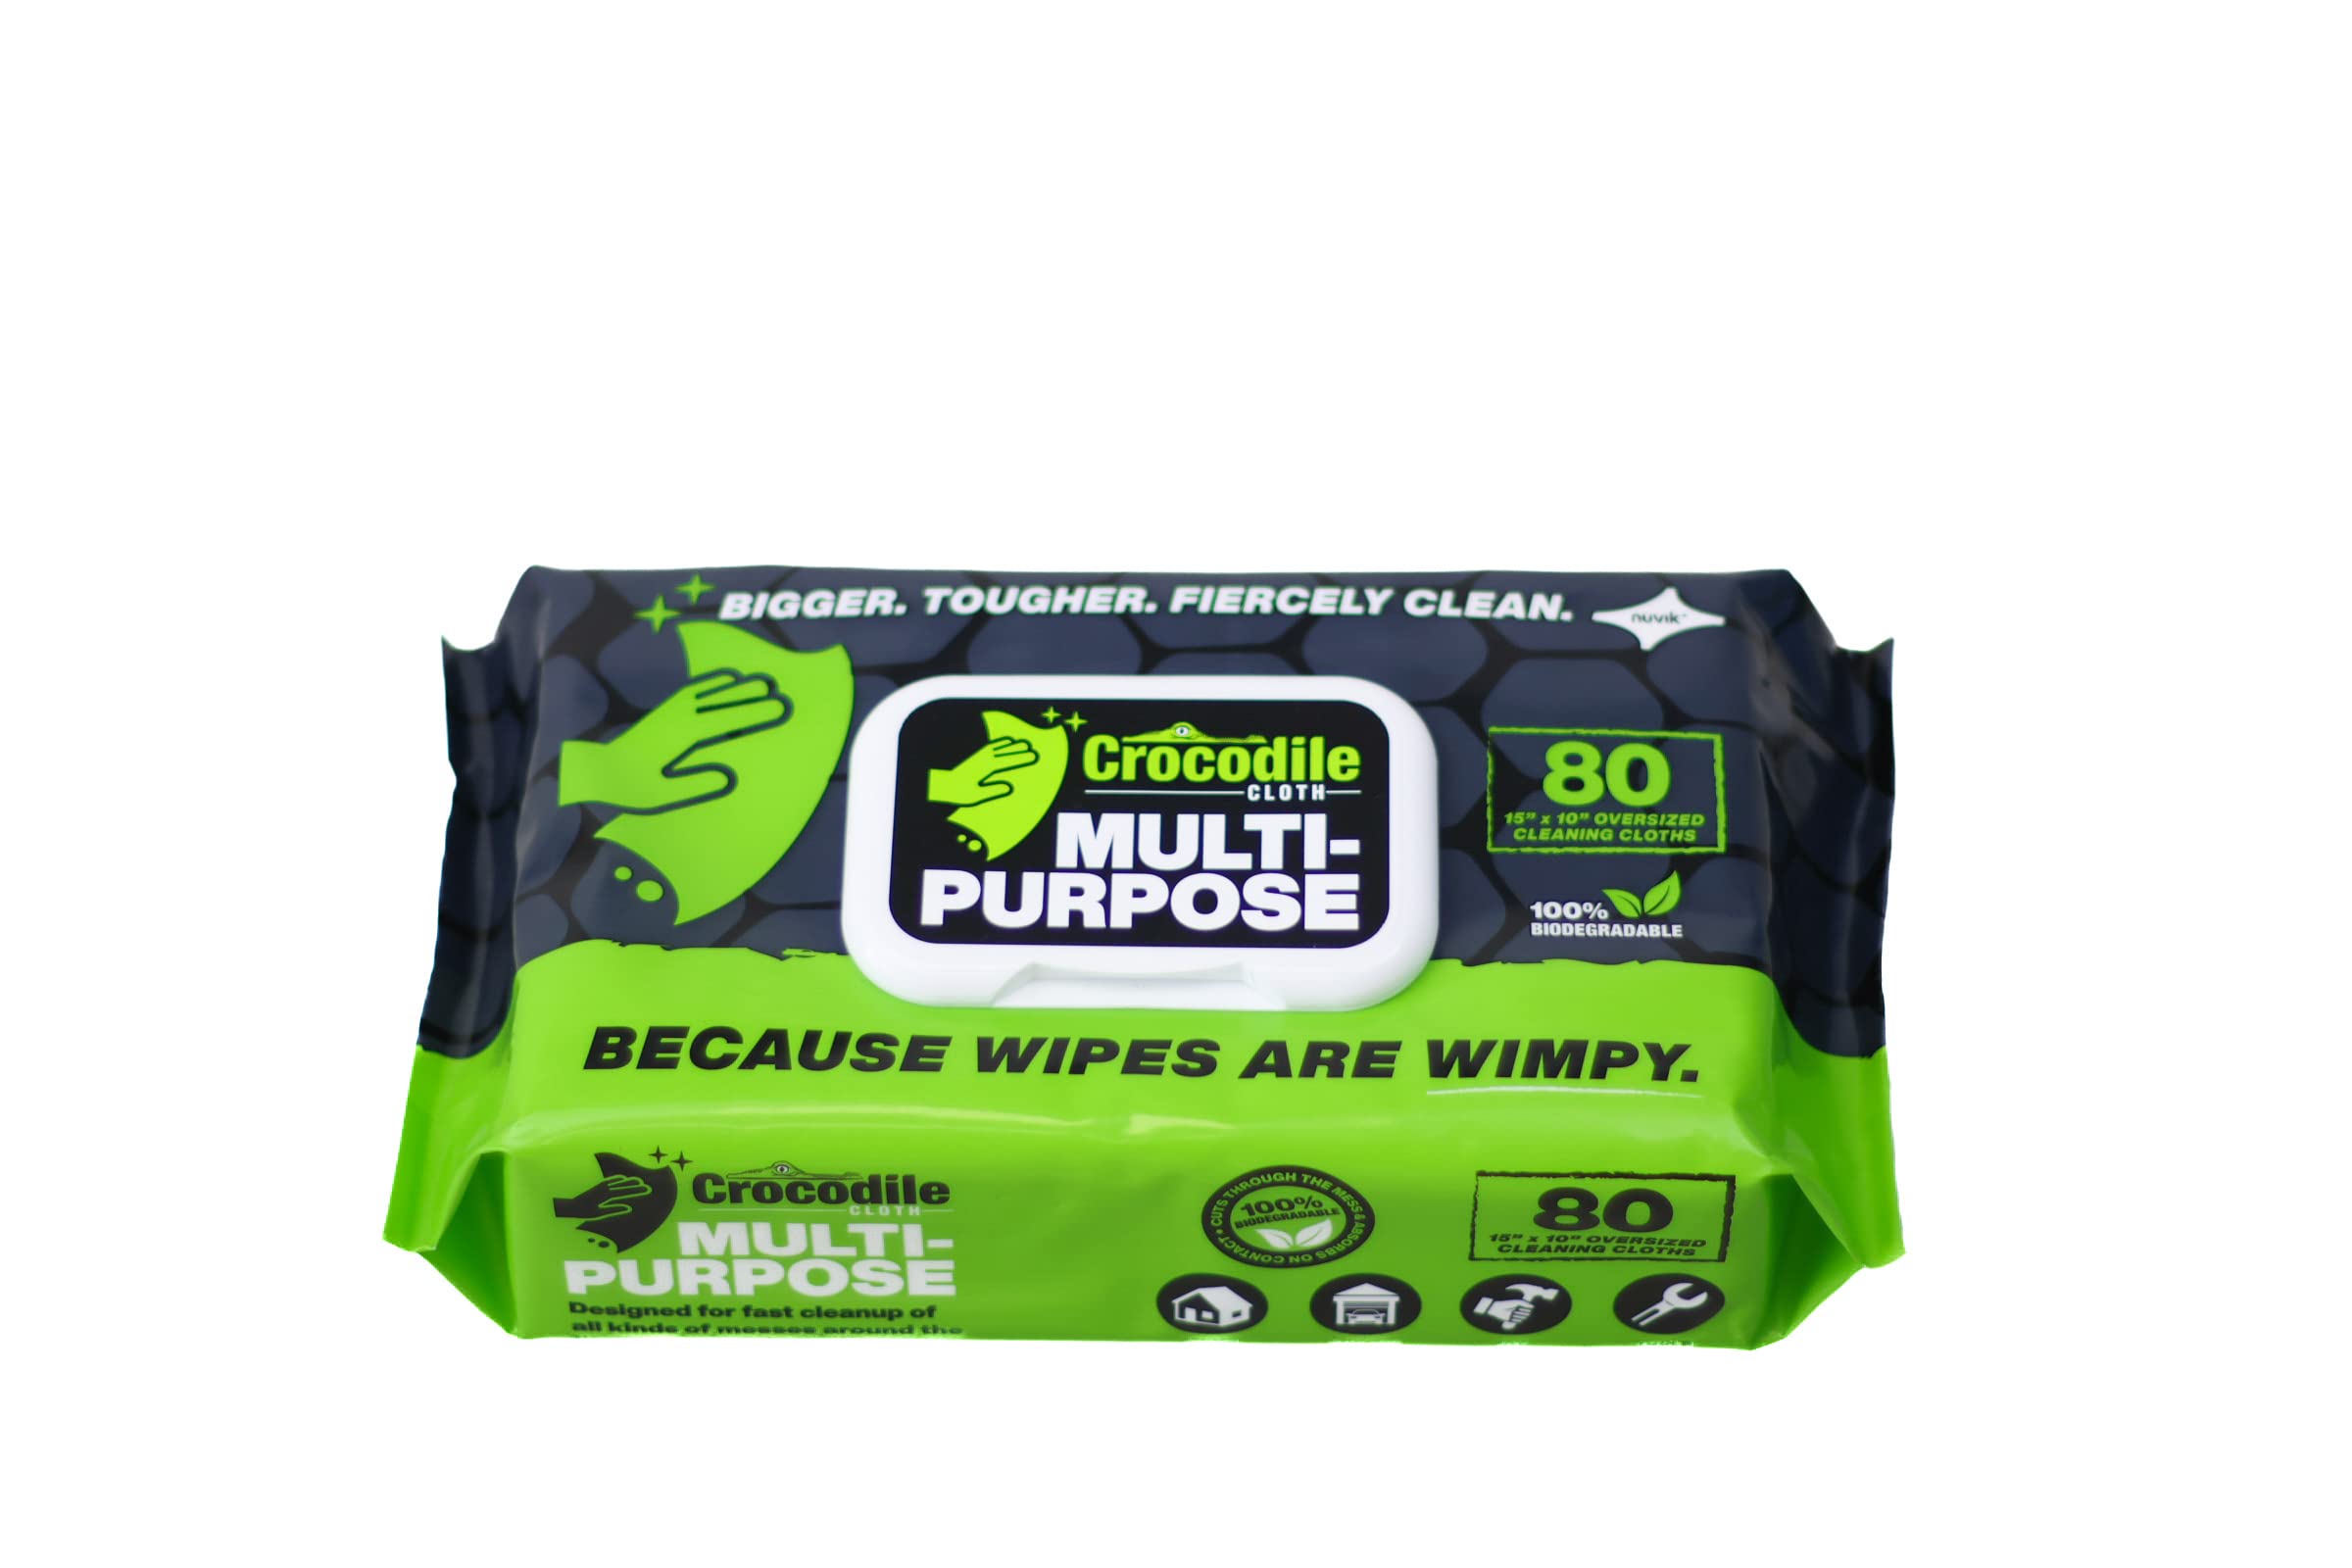 Crocodile Cloth Multi-Purpose Household Cleaning Wipes - The